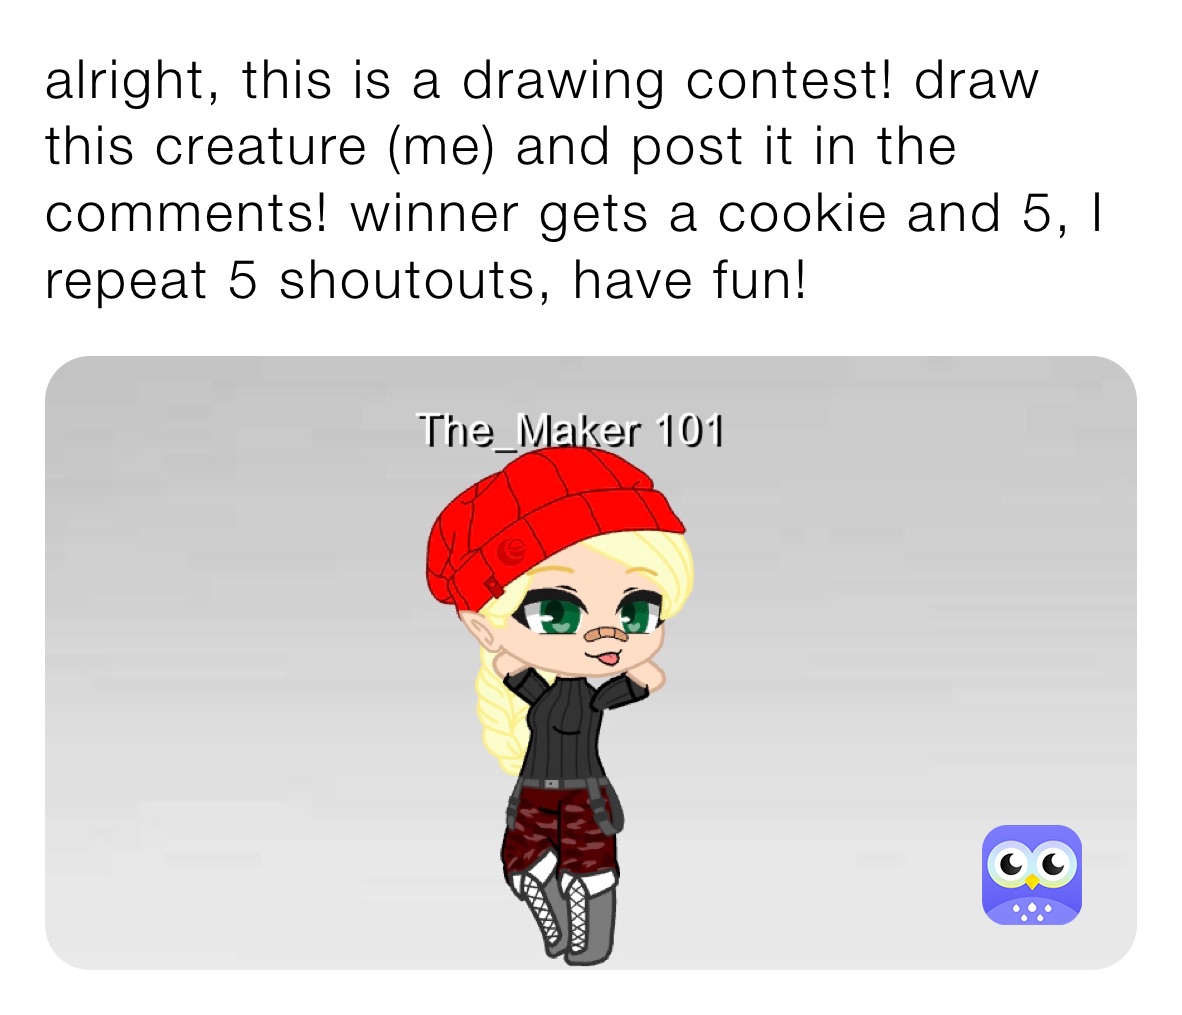 alright, this is a drawing contest! draw this creature (me) and post it in the comments! winner gets a cookie and 5, I repeat 5 shoutouts, have fun!